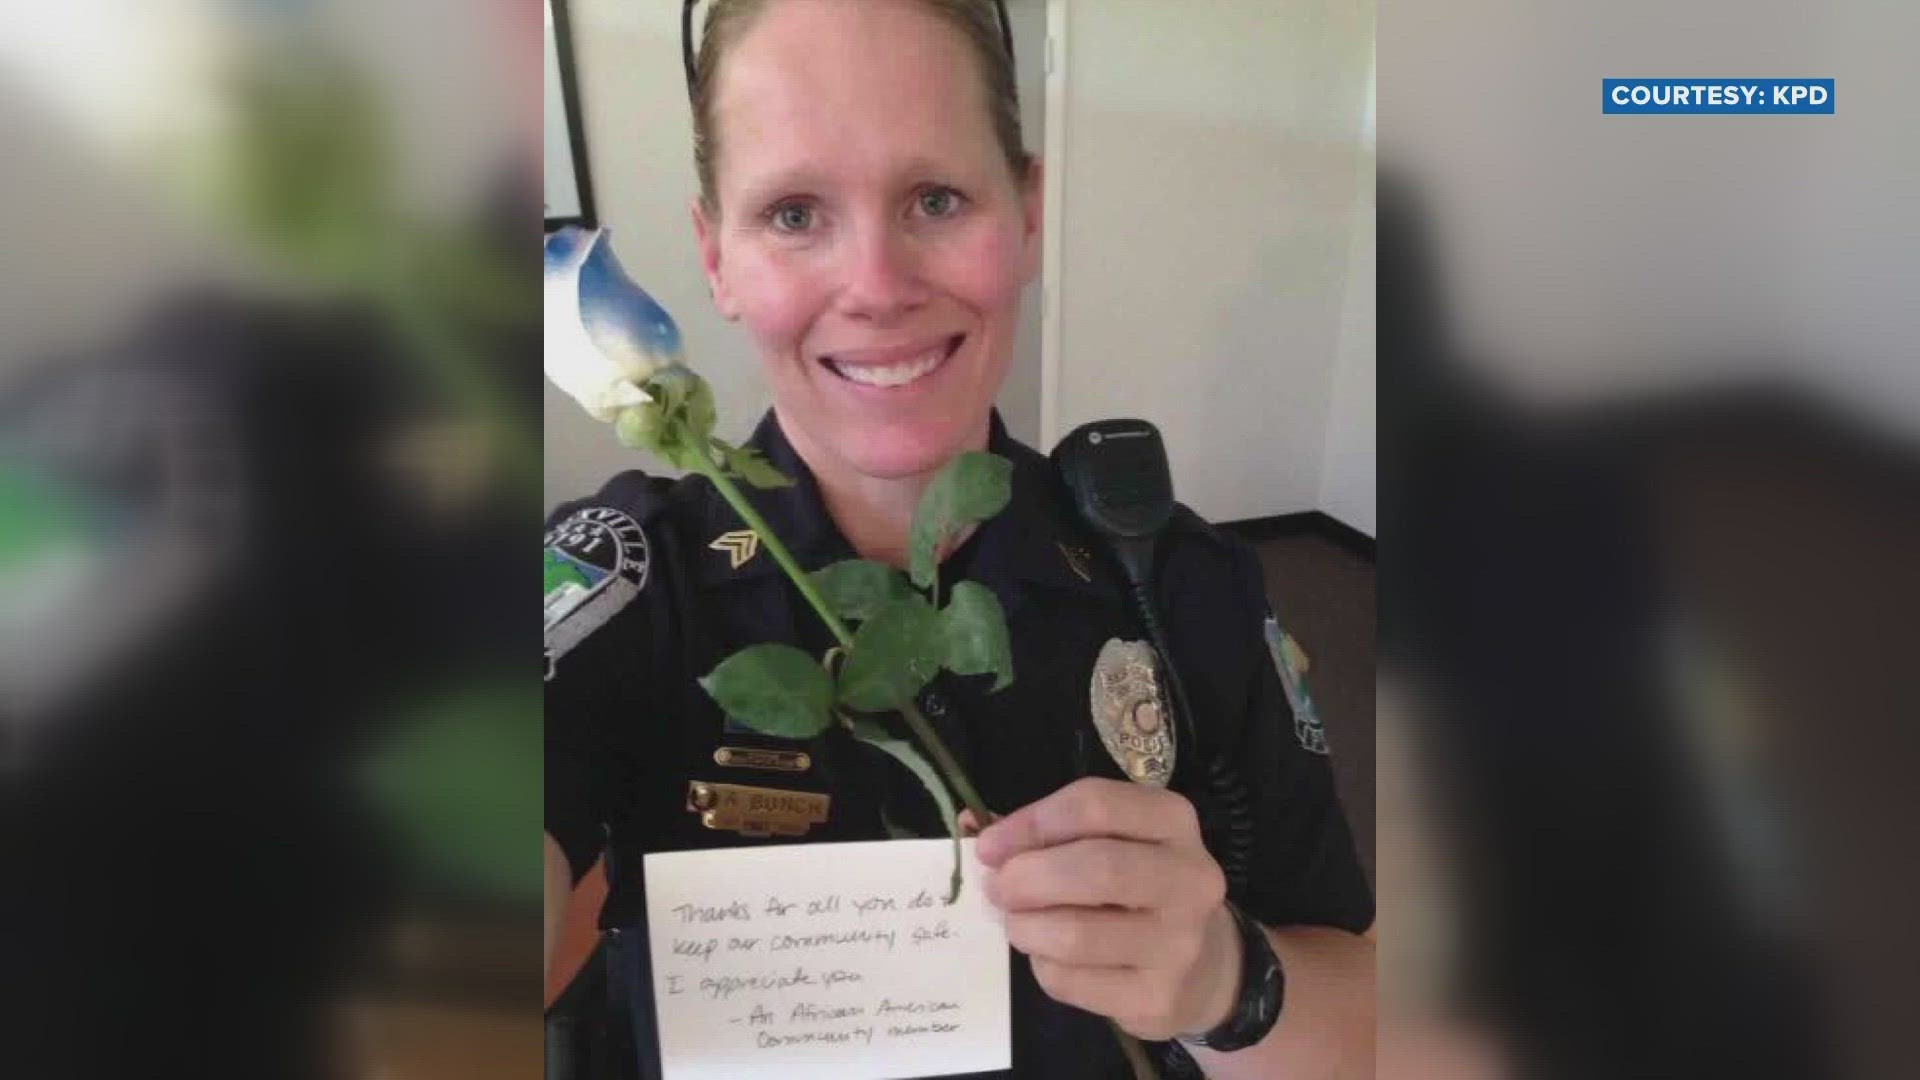 Longtime sergeant Amanda Bunch sent a goodbye email, turning in her equipment but KPD is investigating her conduct. Here is what was in the email.